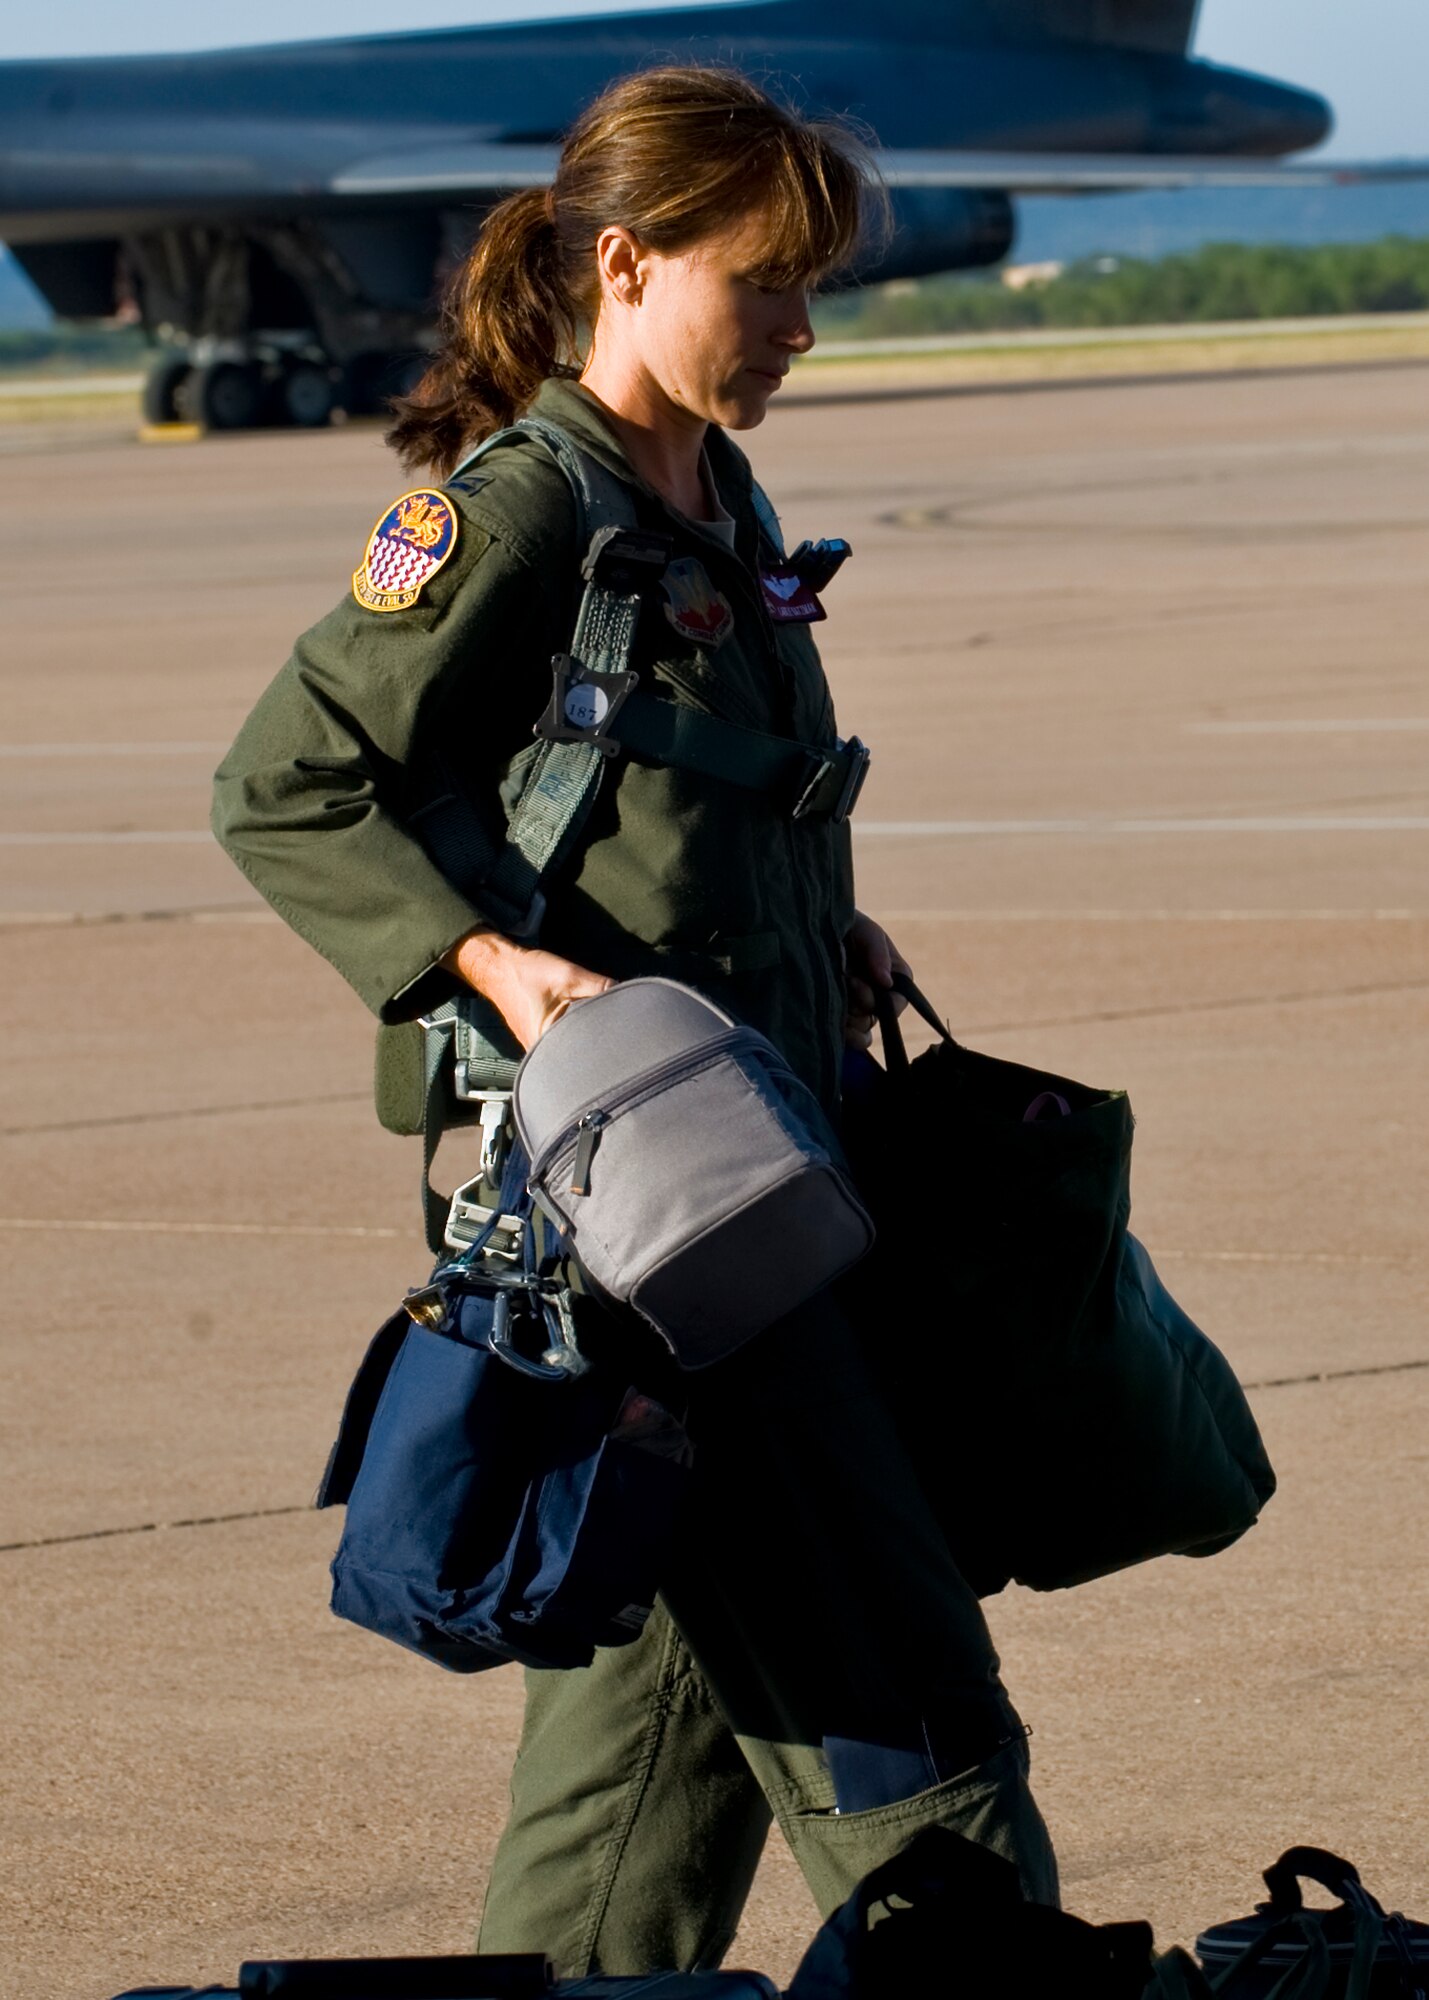 Capt. Alicia Datzman, 337th Test and Evaluation Squadron, readies her gear prior to boarding a B-1 Bomber Sept. 7, 2012, at Dyess Air Force Base, Texas. Datzman is one of eight B-1 pilots competing in the 3rd annual Global Strike Challenge. (U.S. Air Force photo by Airman 1st Class Charles V. Rivezzo/ Released)